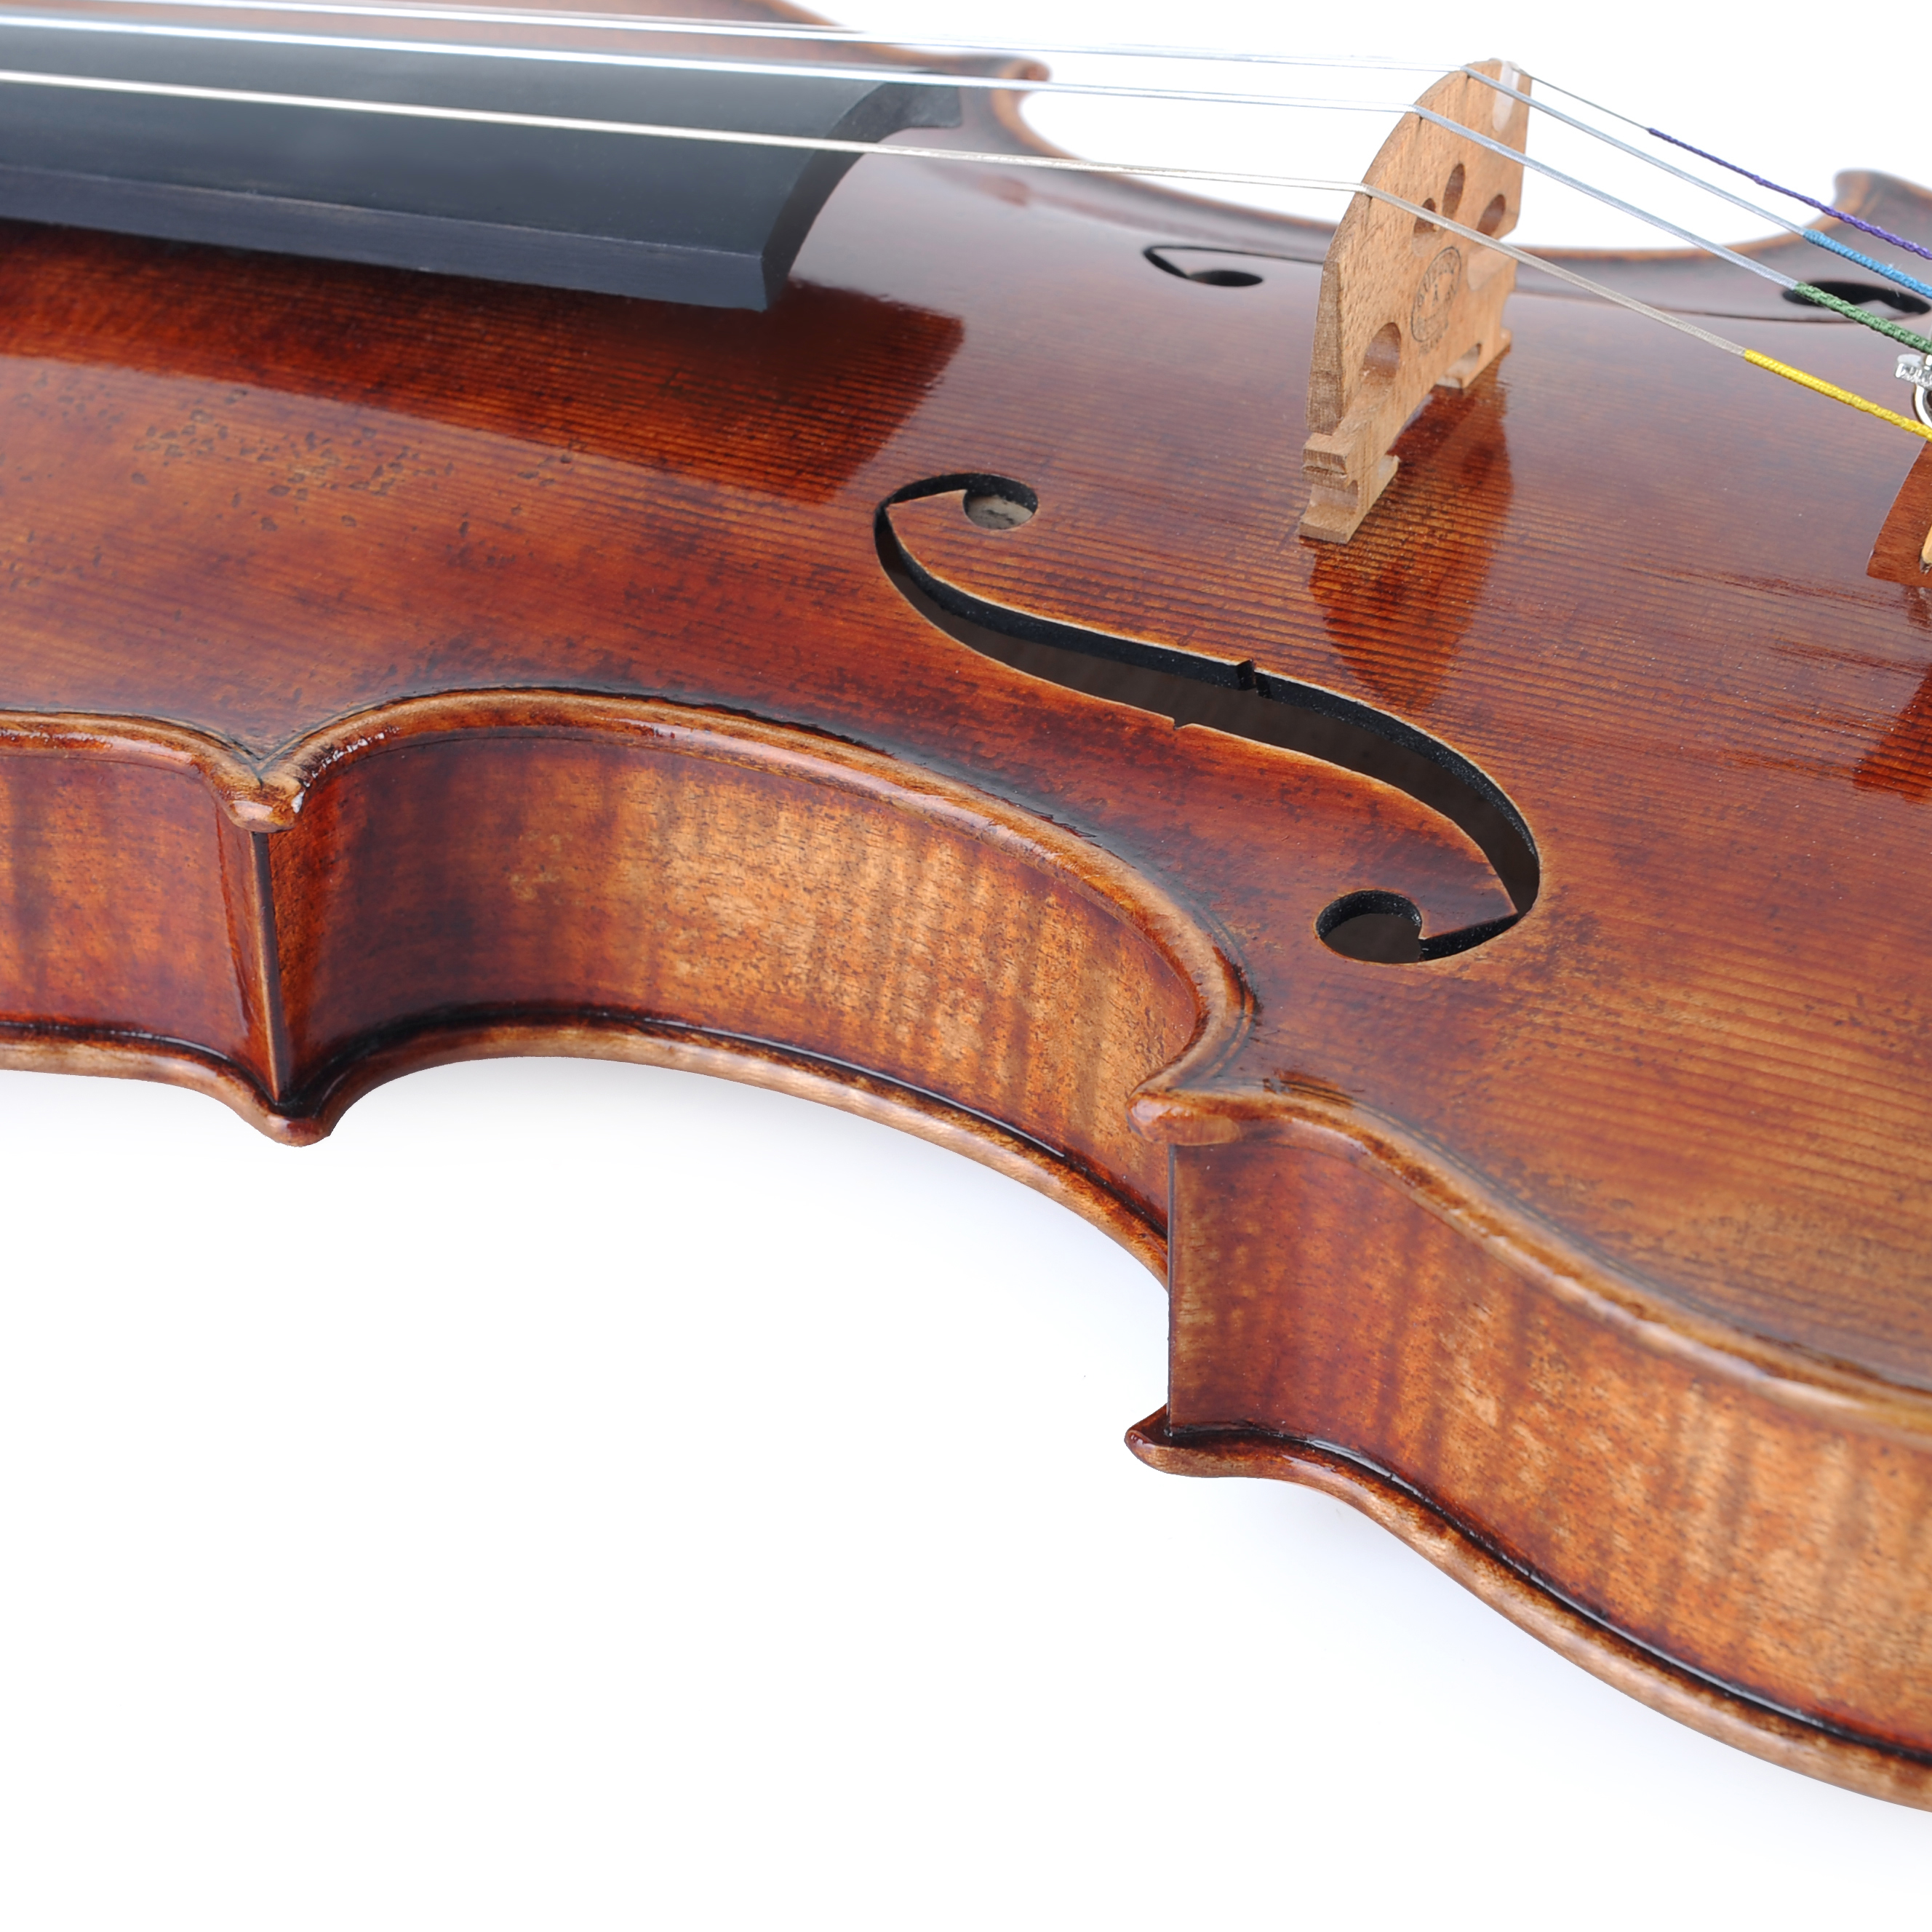 4/4 Europe materials Violin Flamed Maple high quality chinese violin(VH600EM)